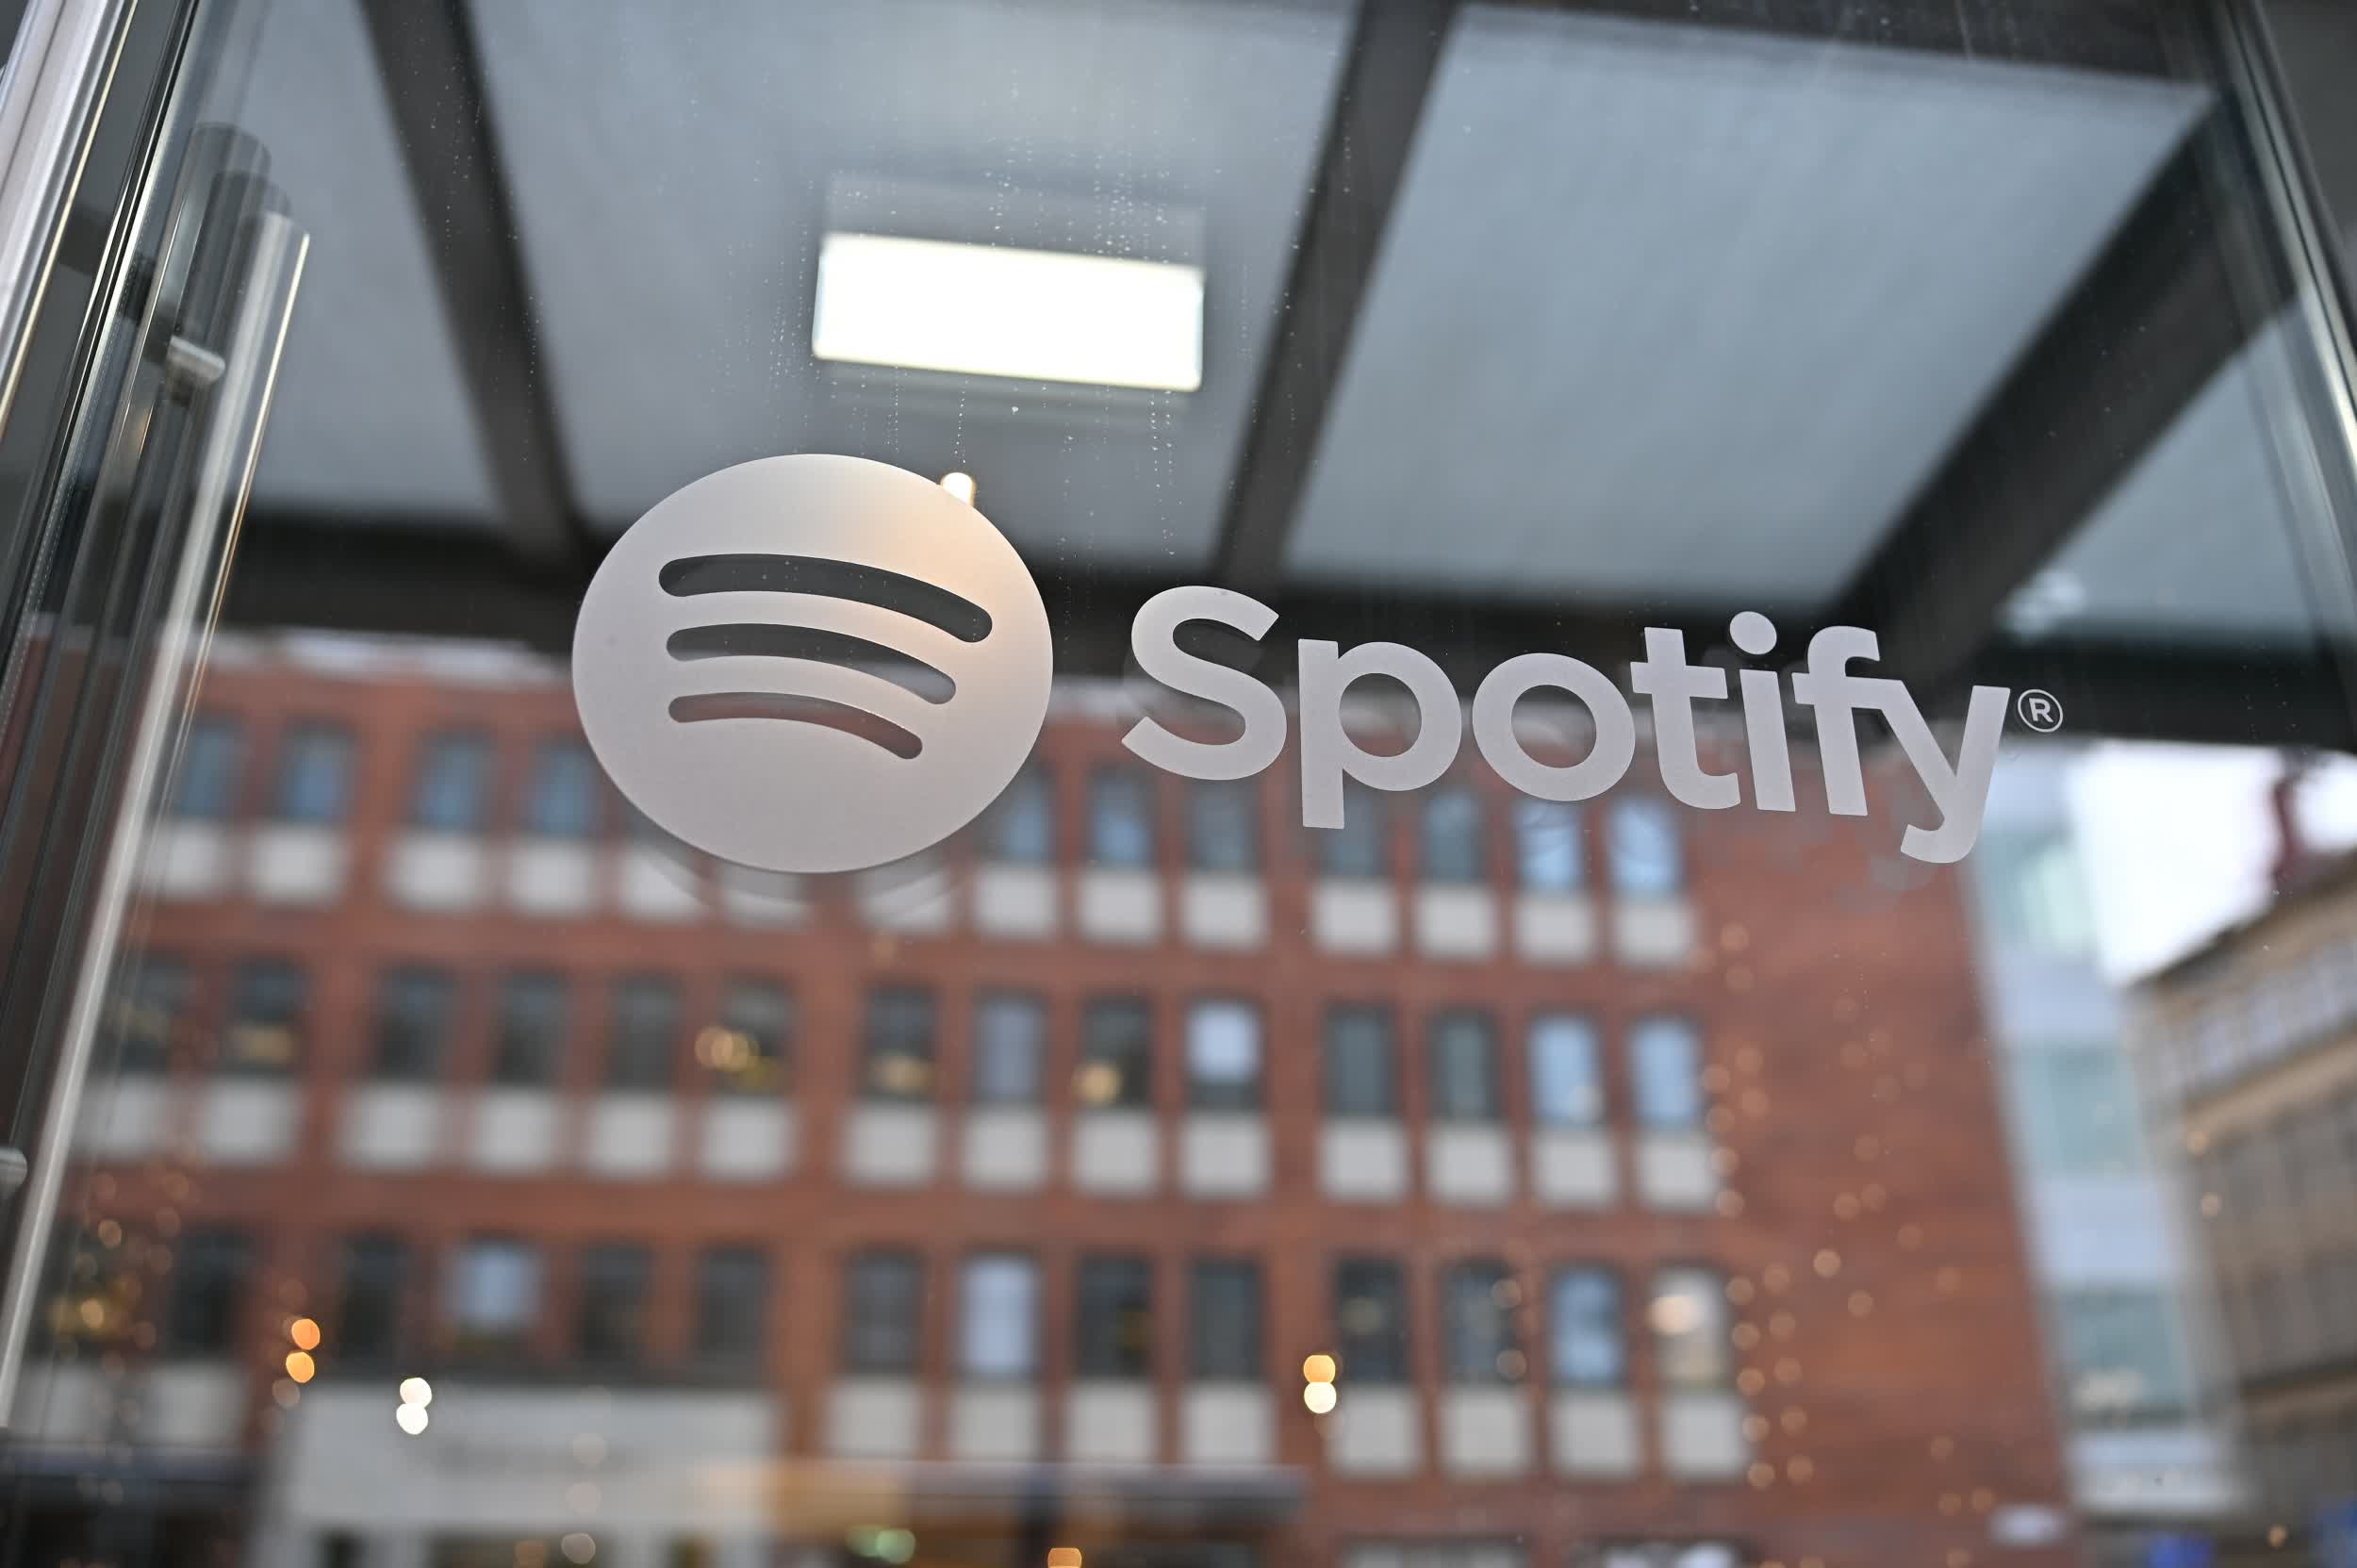 Spotify podcasts that mention Covid-19 to come with content advisory as more musicians leave service, Joe Rogan responds